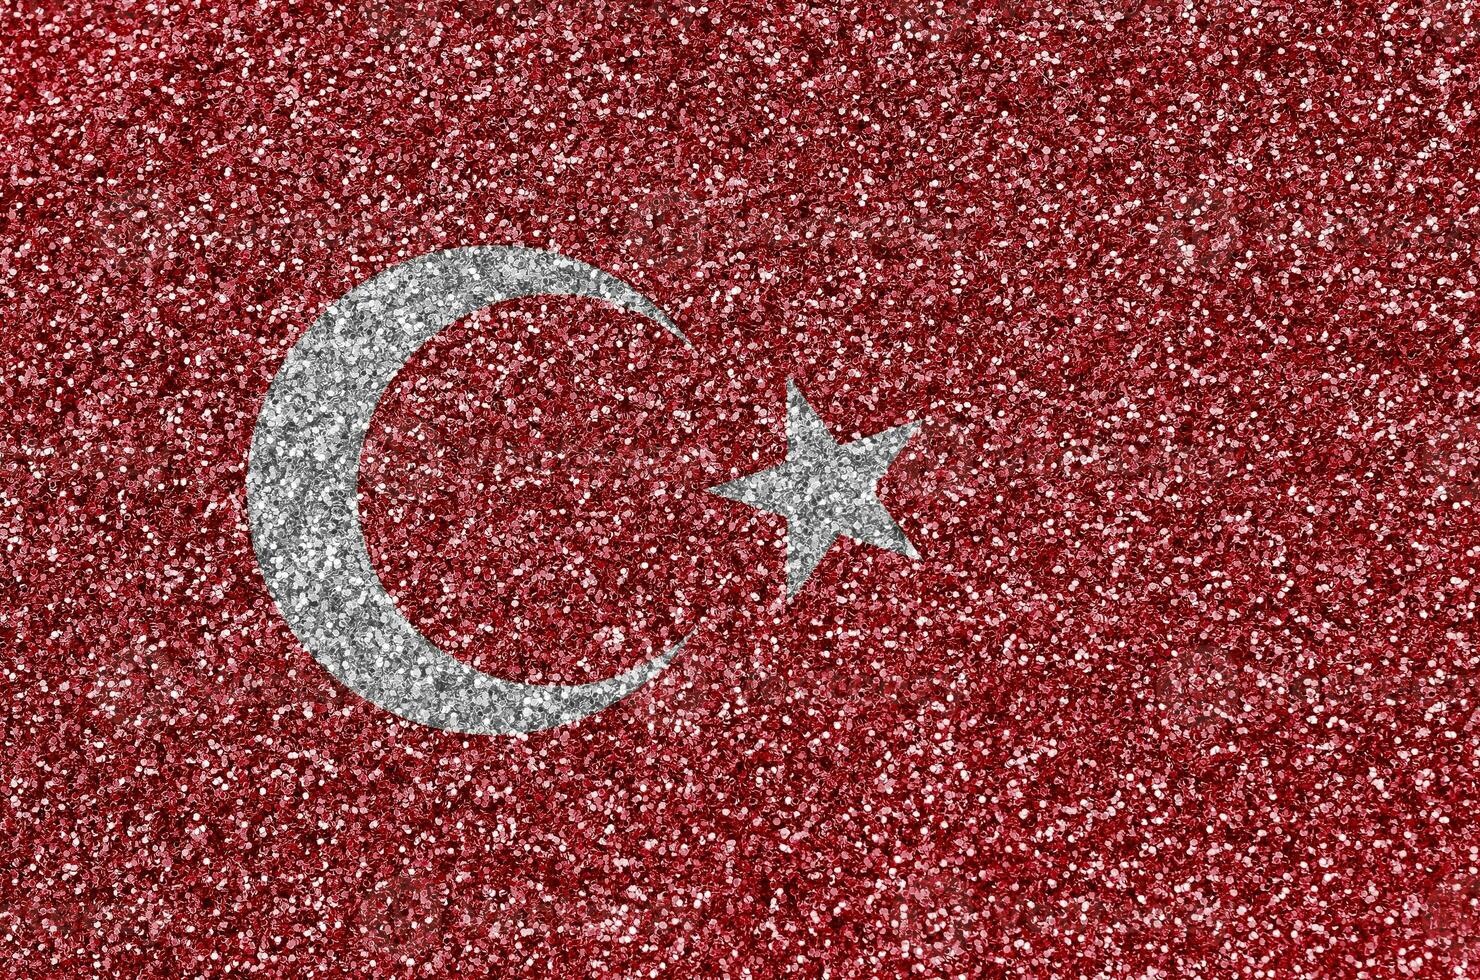 Turkey flag depicted on many small shiny sequins. Colorful festival background for party photo